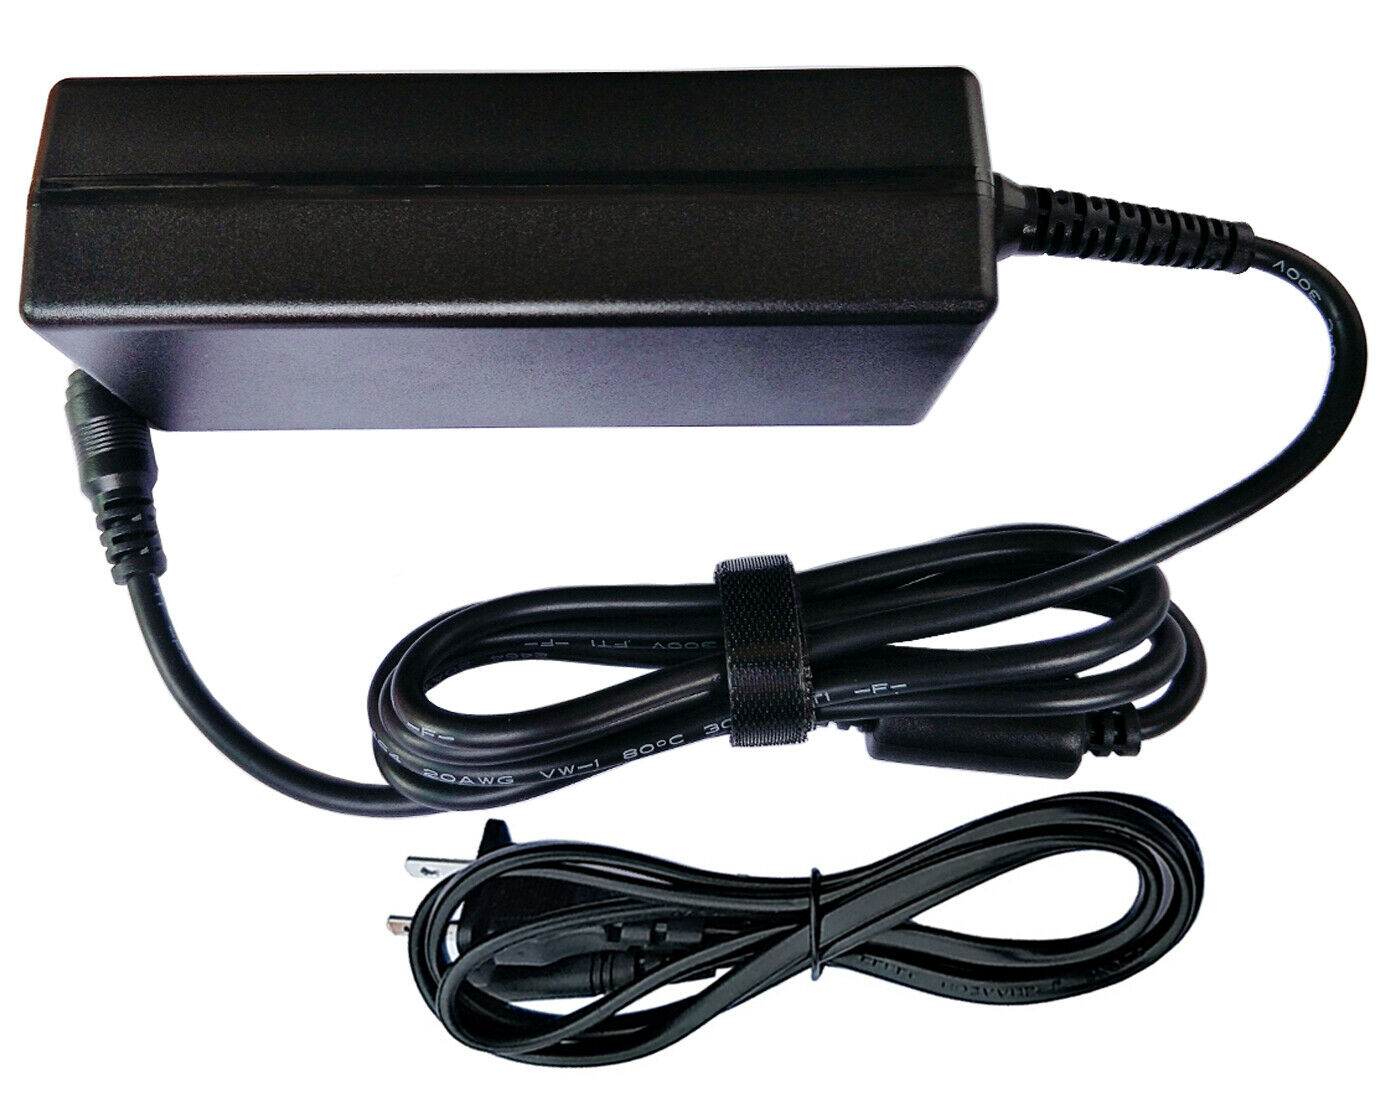 AC/DC Adapter For belkin PDN-80-01 PDN8001 Thunderbolt Express Dock Power Supply Technical Specifications: 1 AC input v